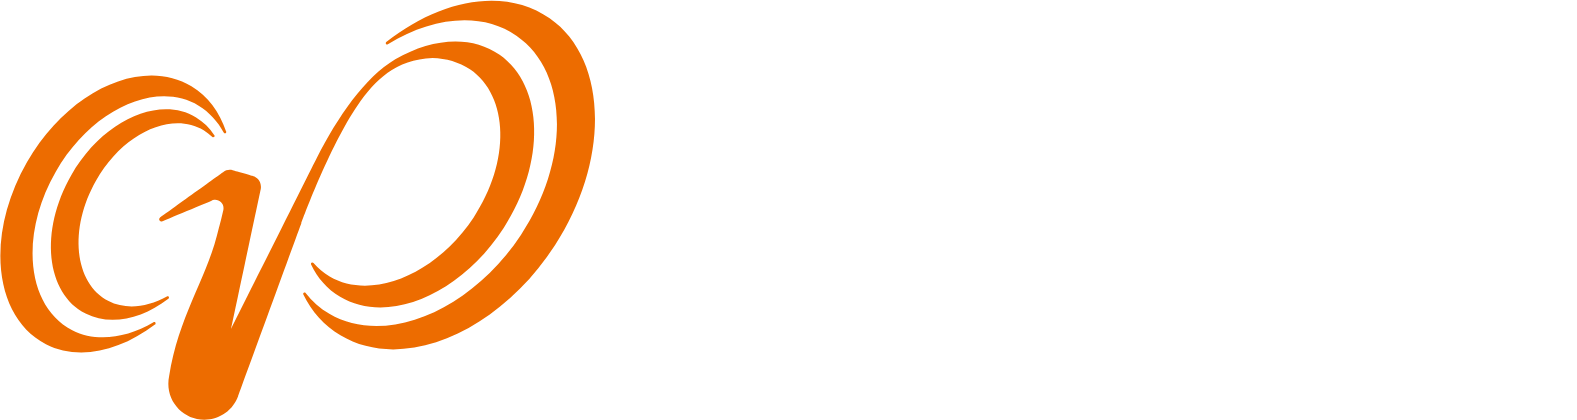 CGN Mining Company logo large for dark backgrounds (transparent PNG)